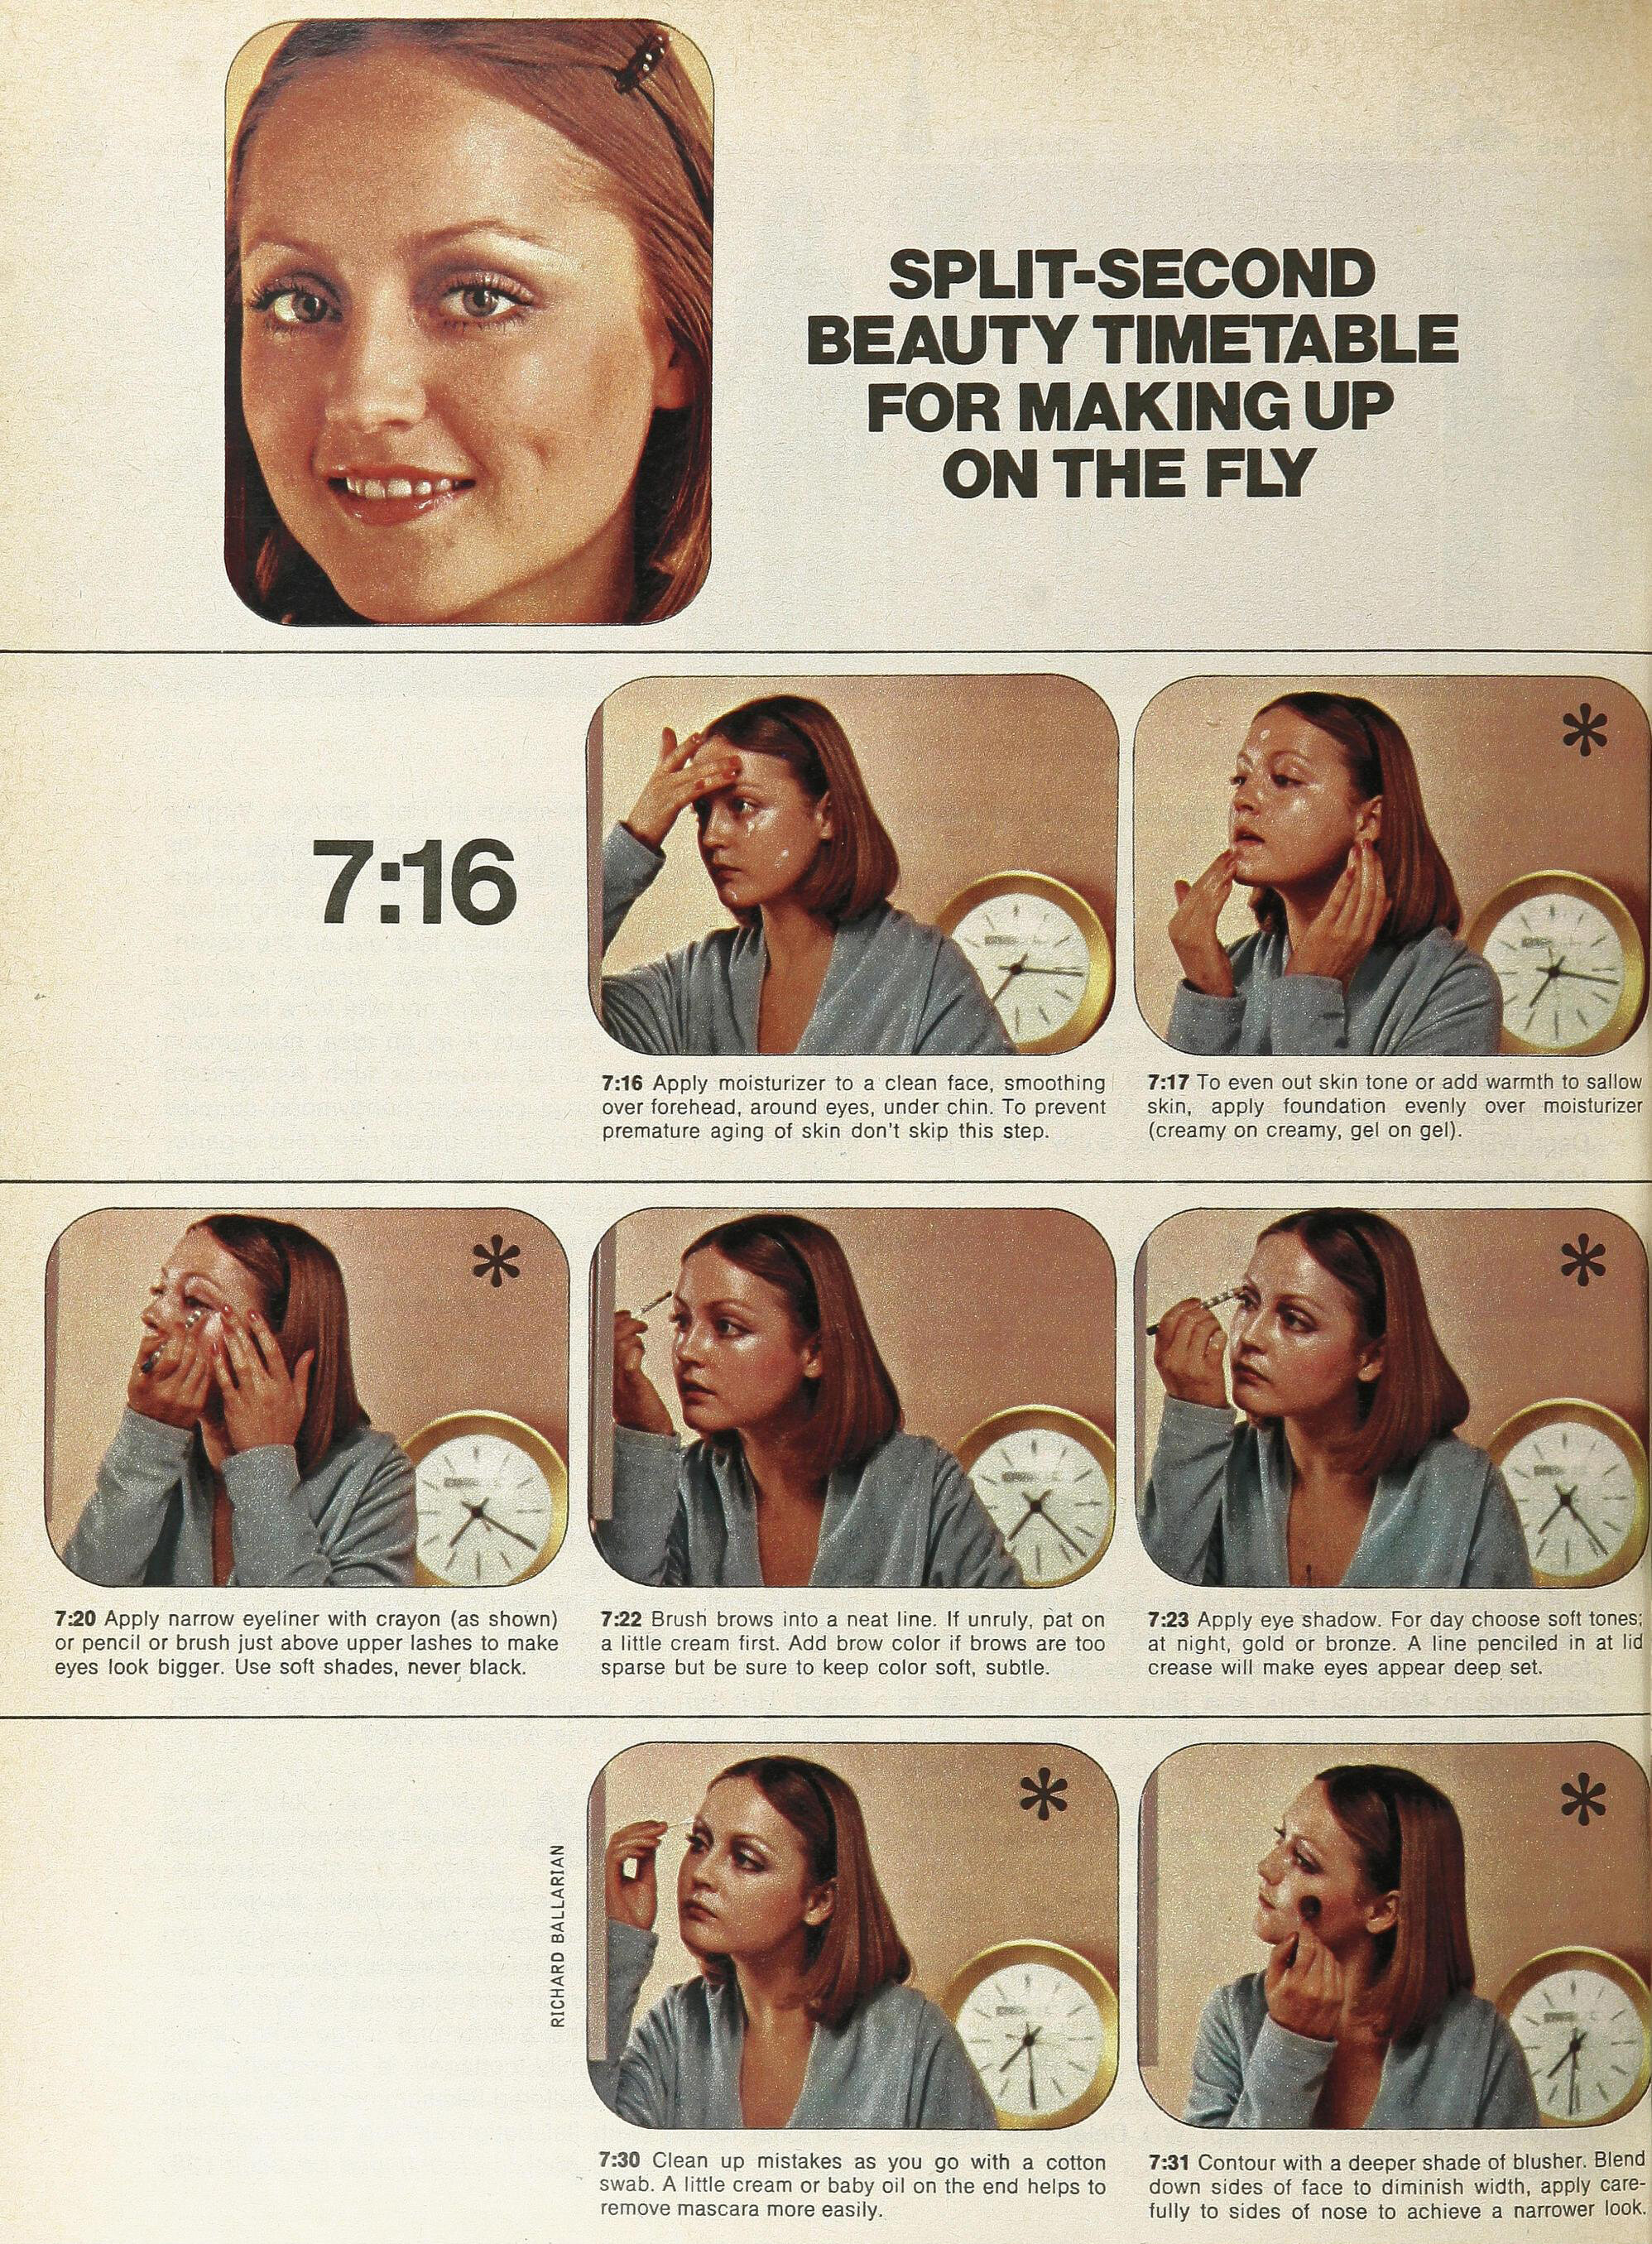 Ingrid showing off her morning beauty routine in Women's Day, April 1970. Photos by Richard Ballerian.